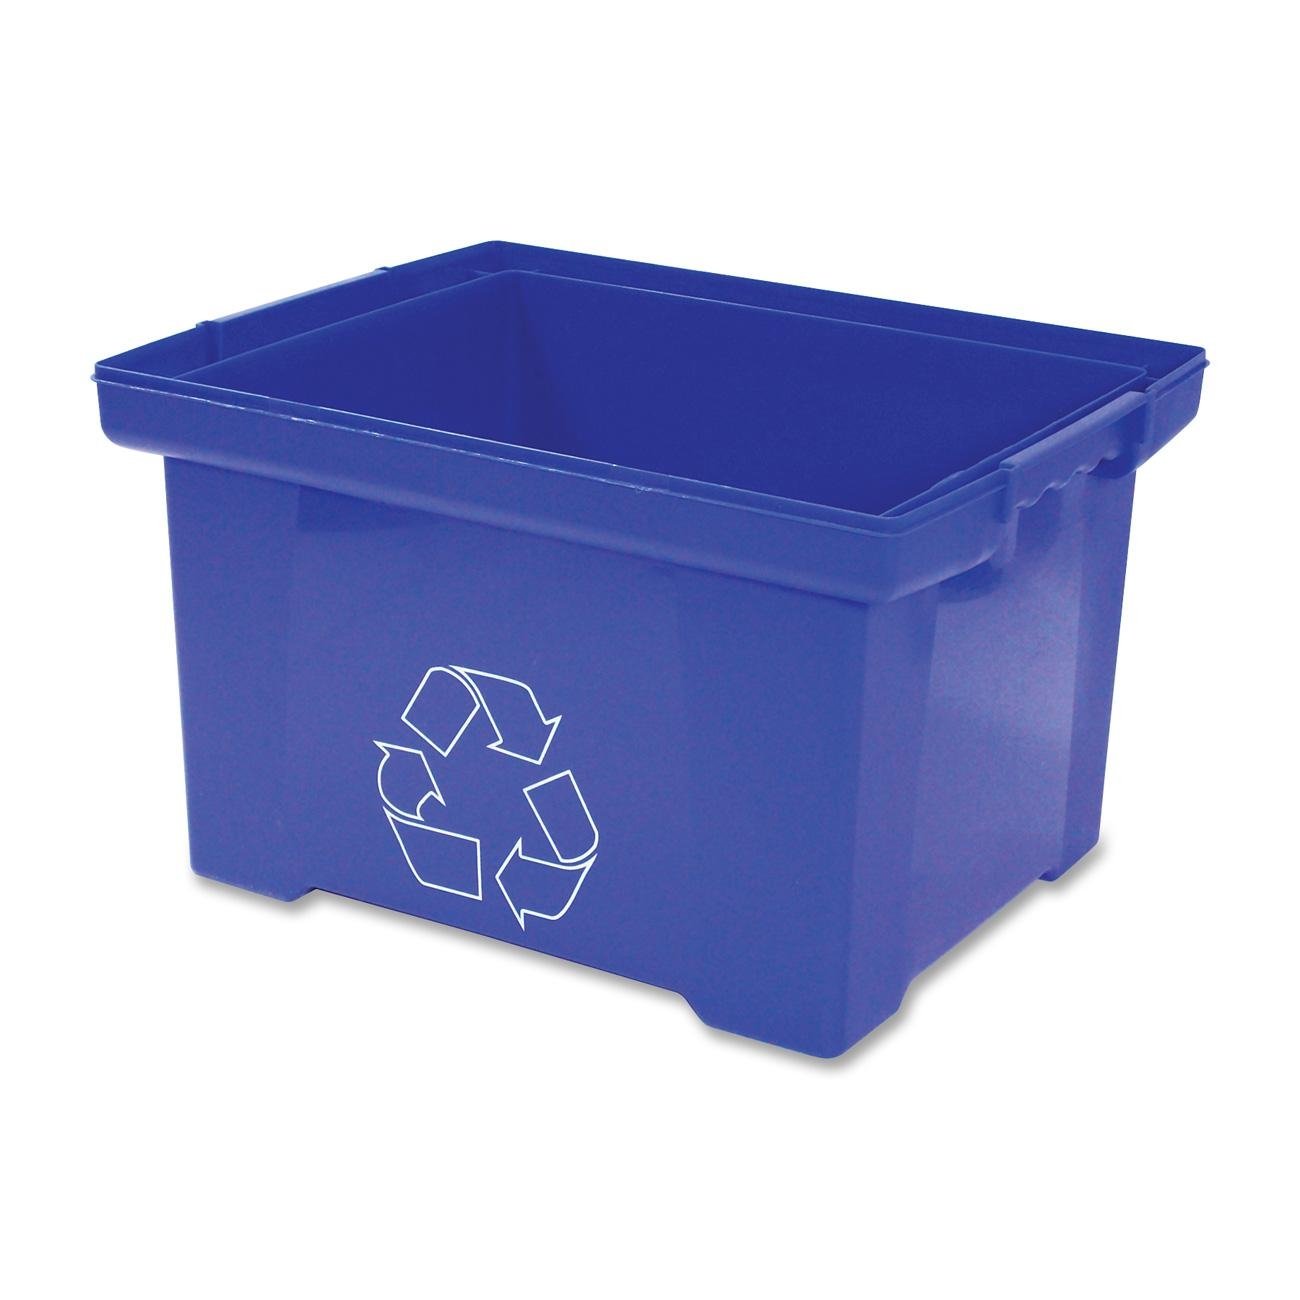 Storex Recycling Container Bin